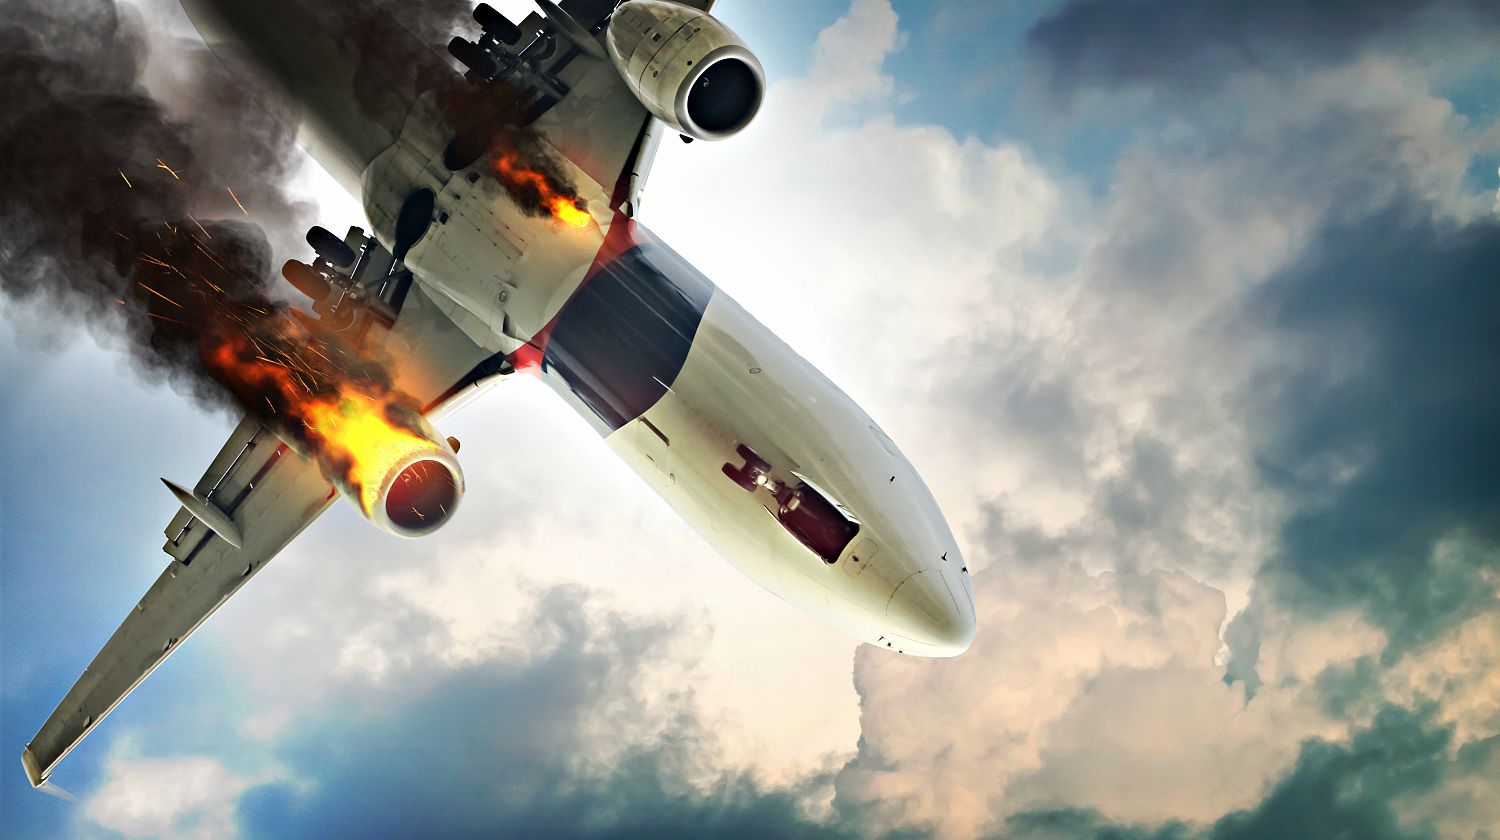 Featured | Flame of airplane engine | How To Survive A Plane Crash | Safety And Preparedness Tips